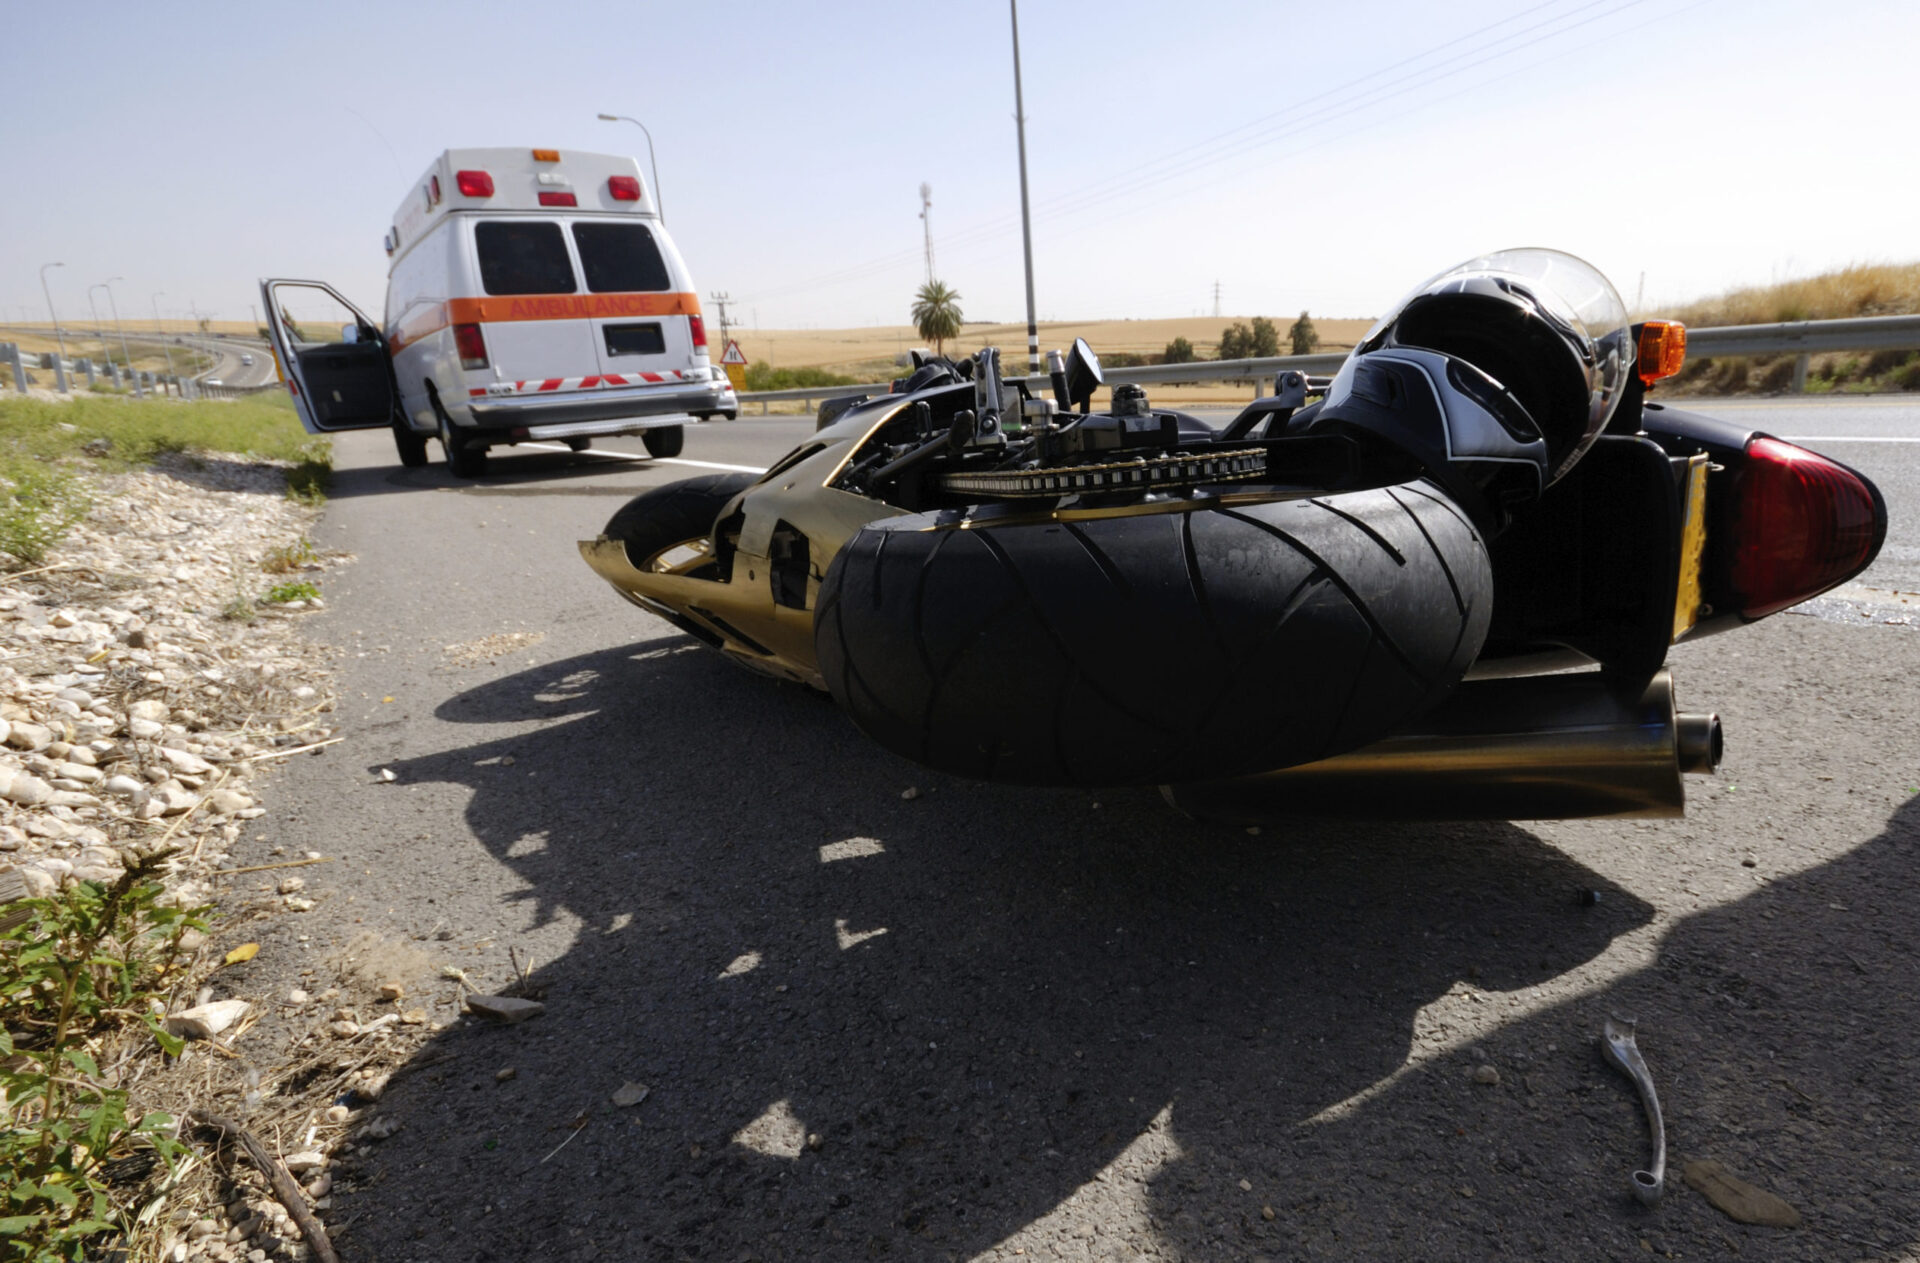 What Is an Ocala Motorcycle Broadside Accident?